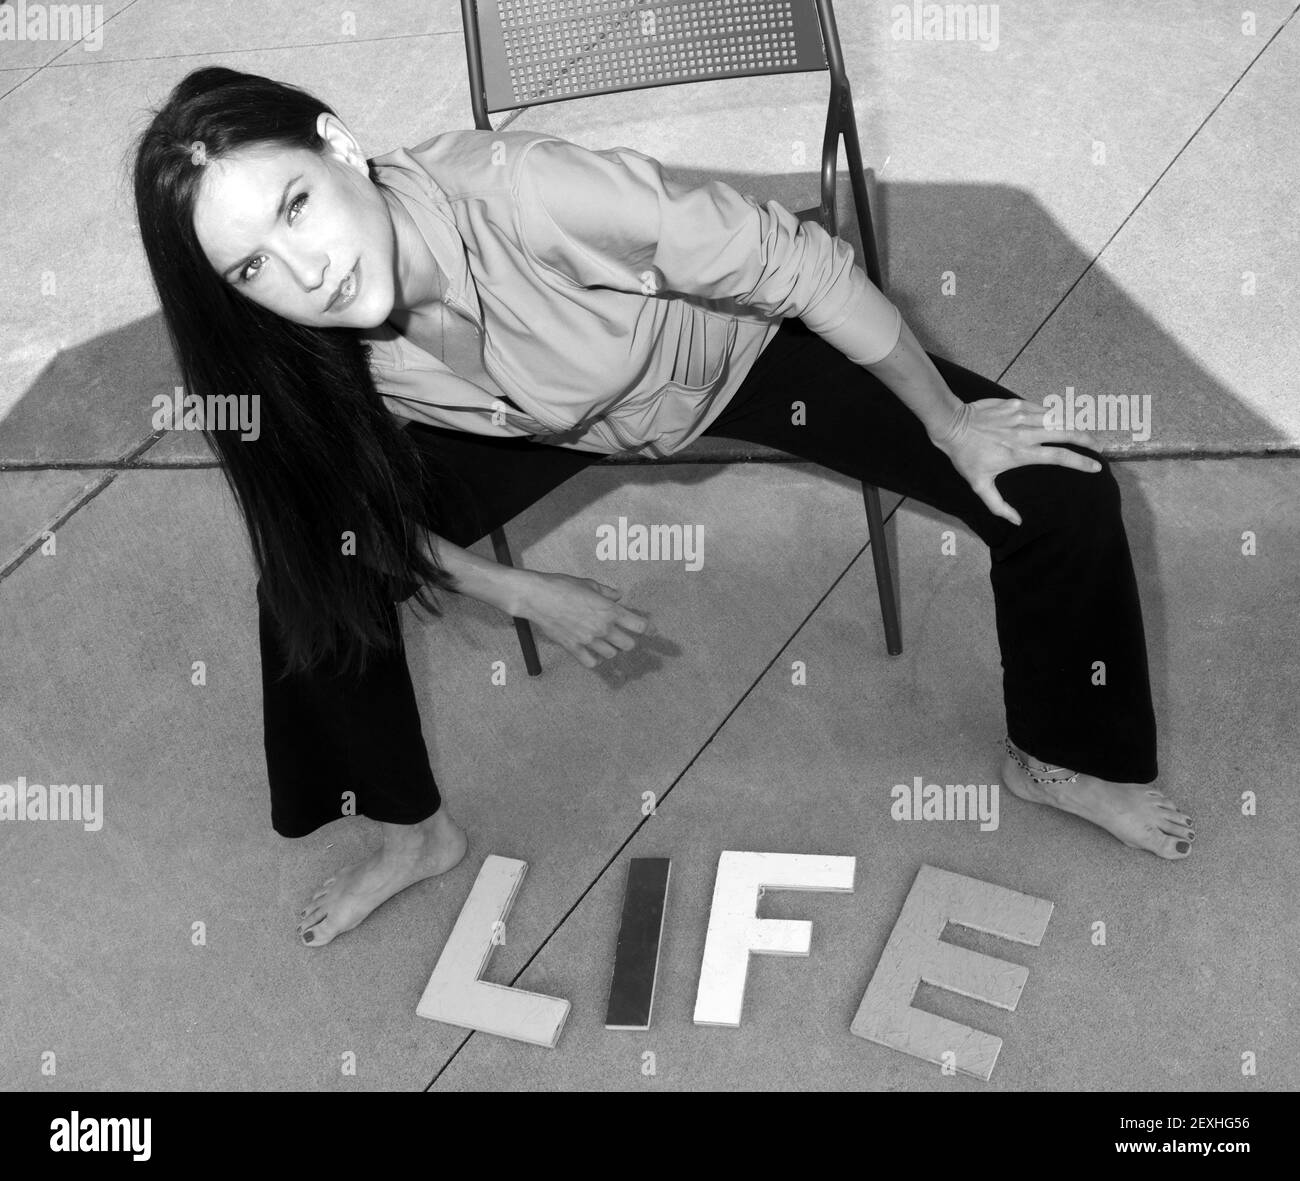 Attractive woman on concrete Above the Word Life in Block Letters Stock Photo